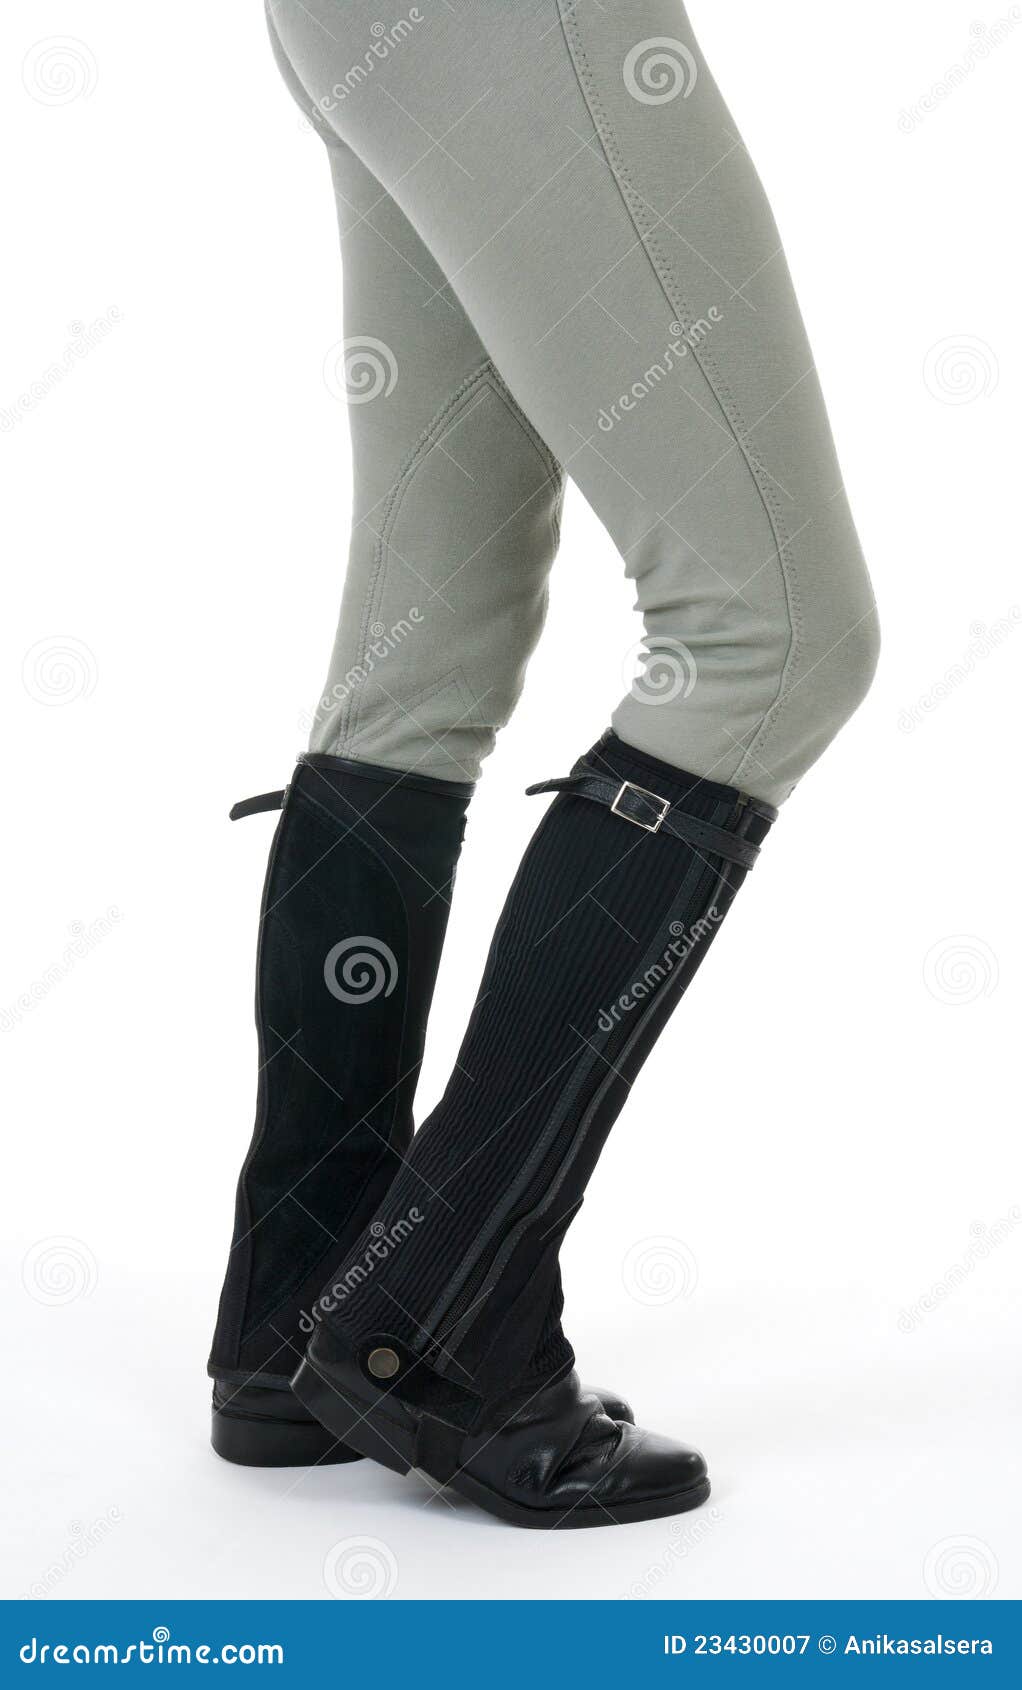 woman wearing horse riding boots and breeches